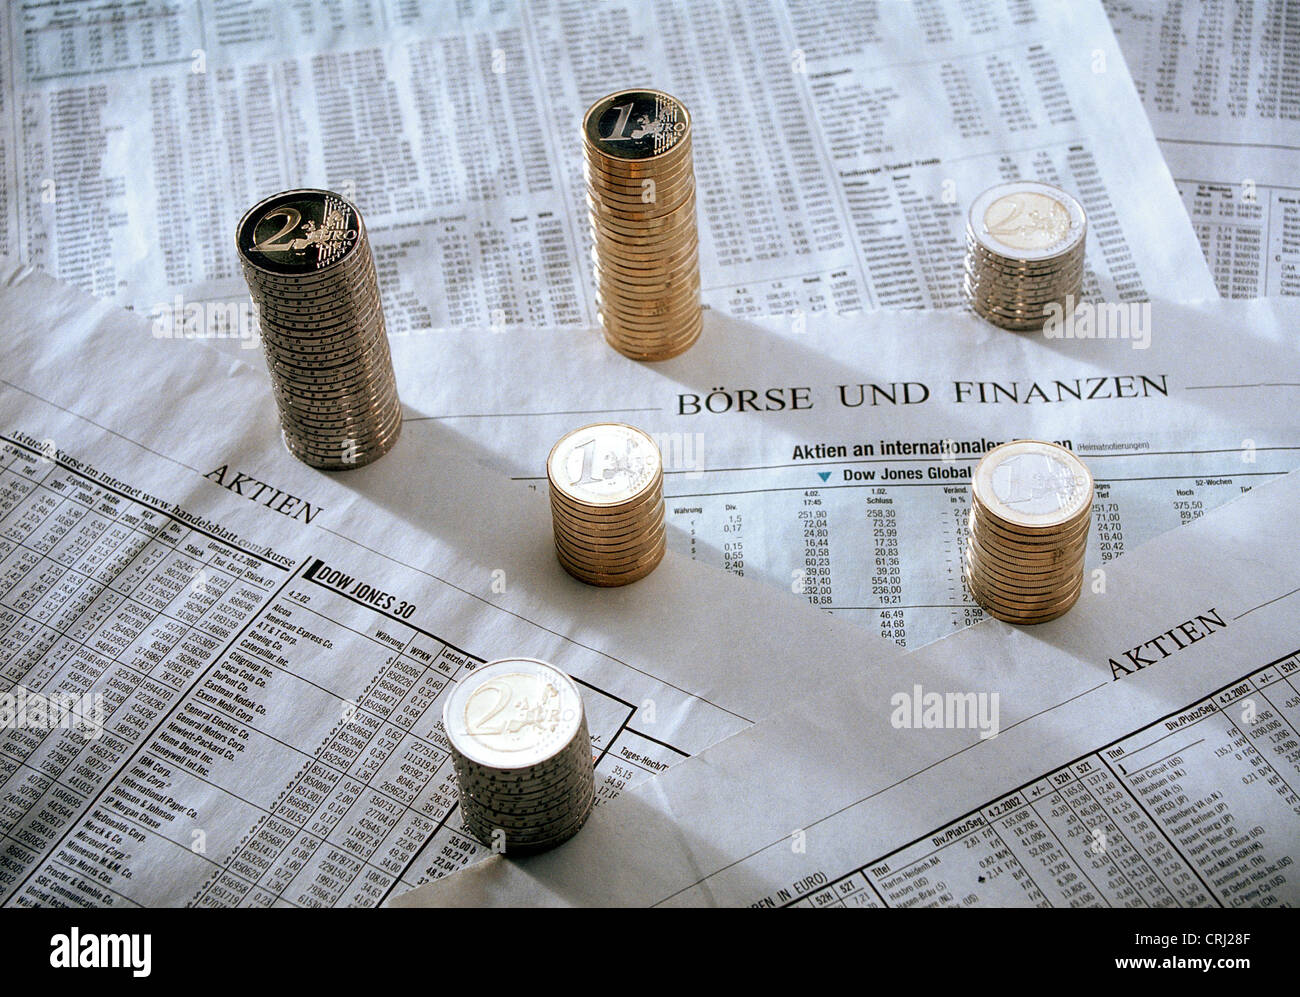 Stack of Euromuenzen on a newspaper page with stock market developments Stock Photo